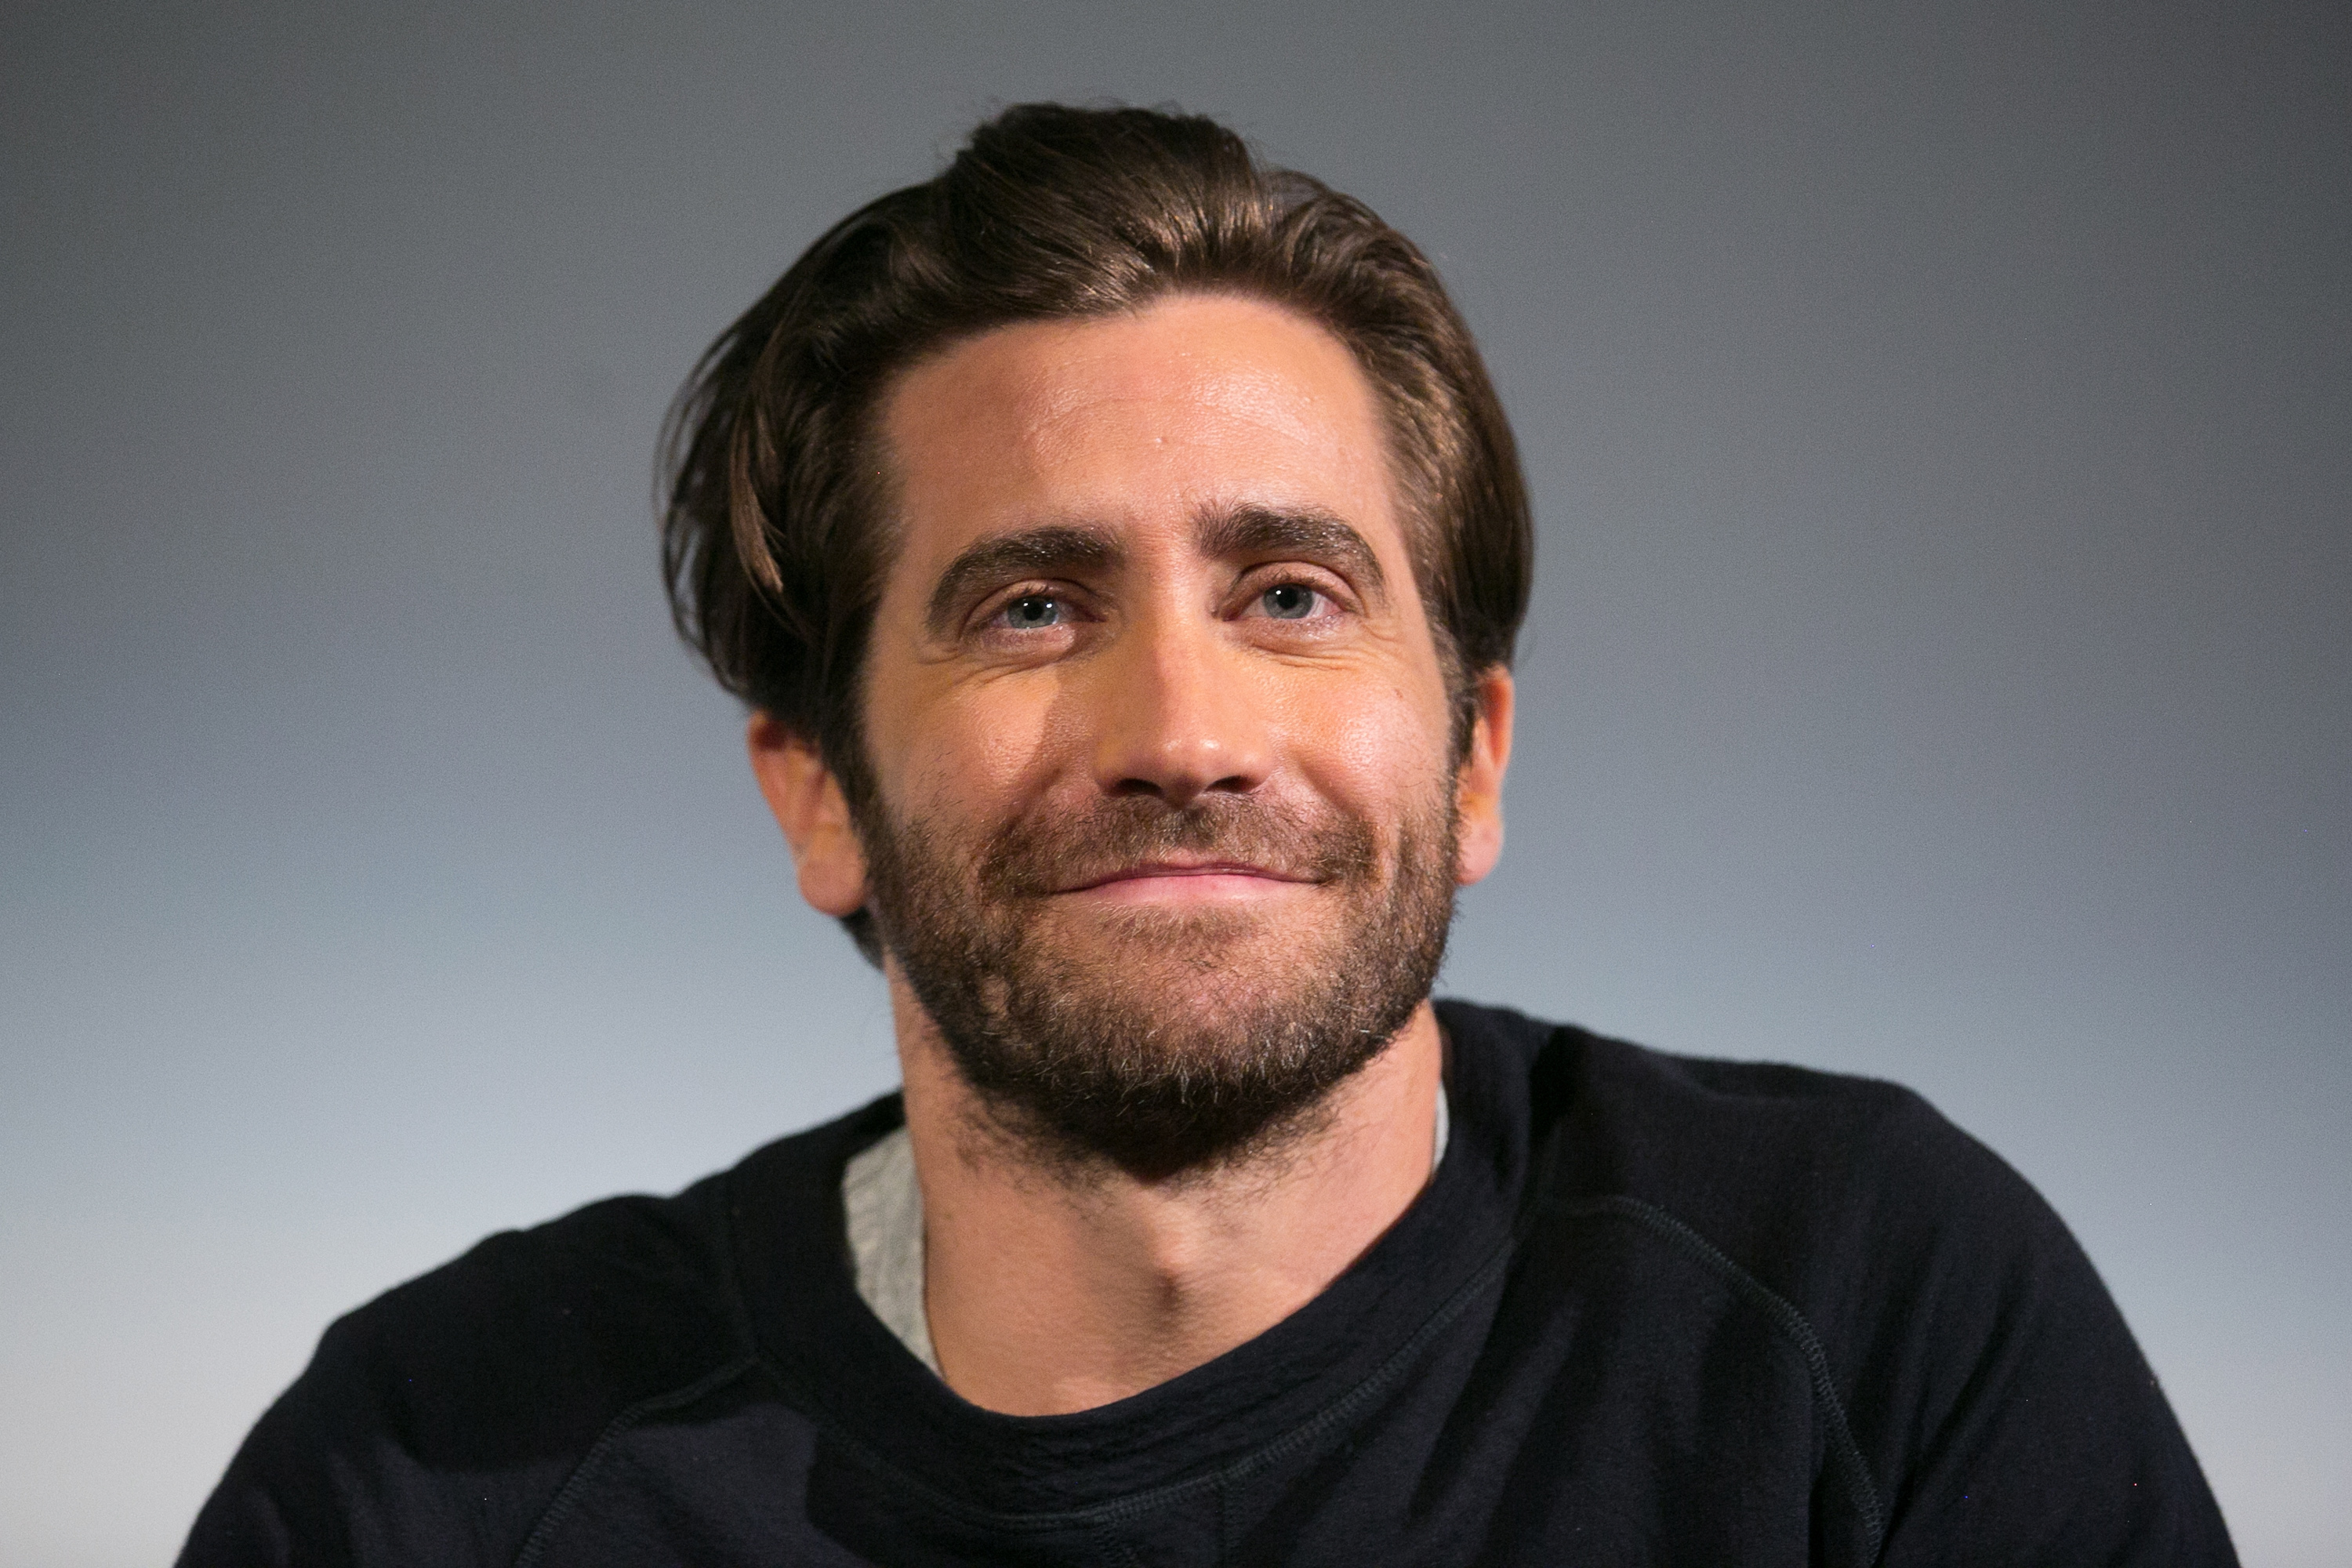 Jake Gyllenhaal could play the villain in Spider-Man: Homecoming sequel